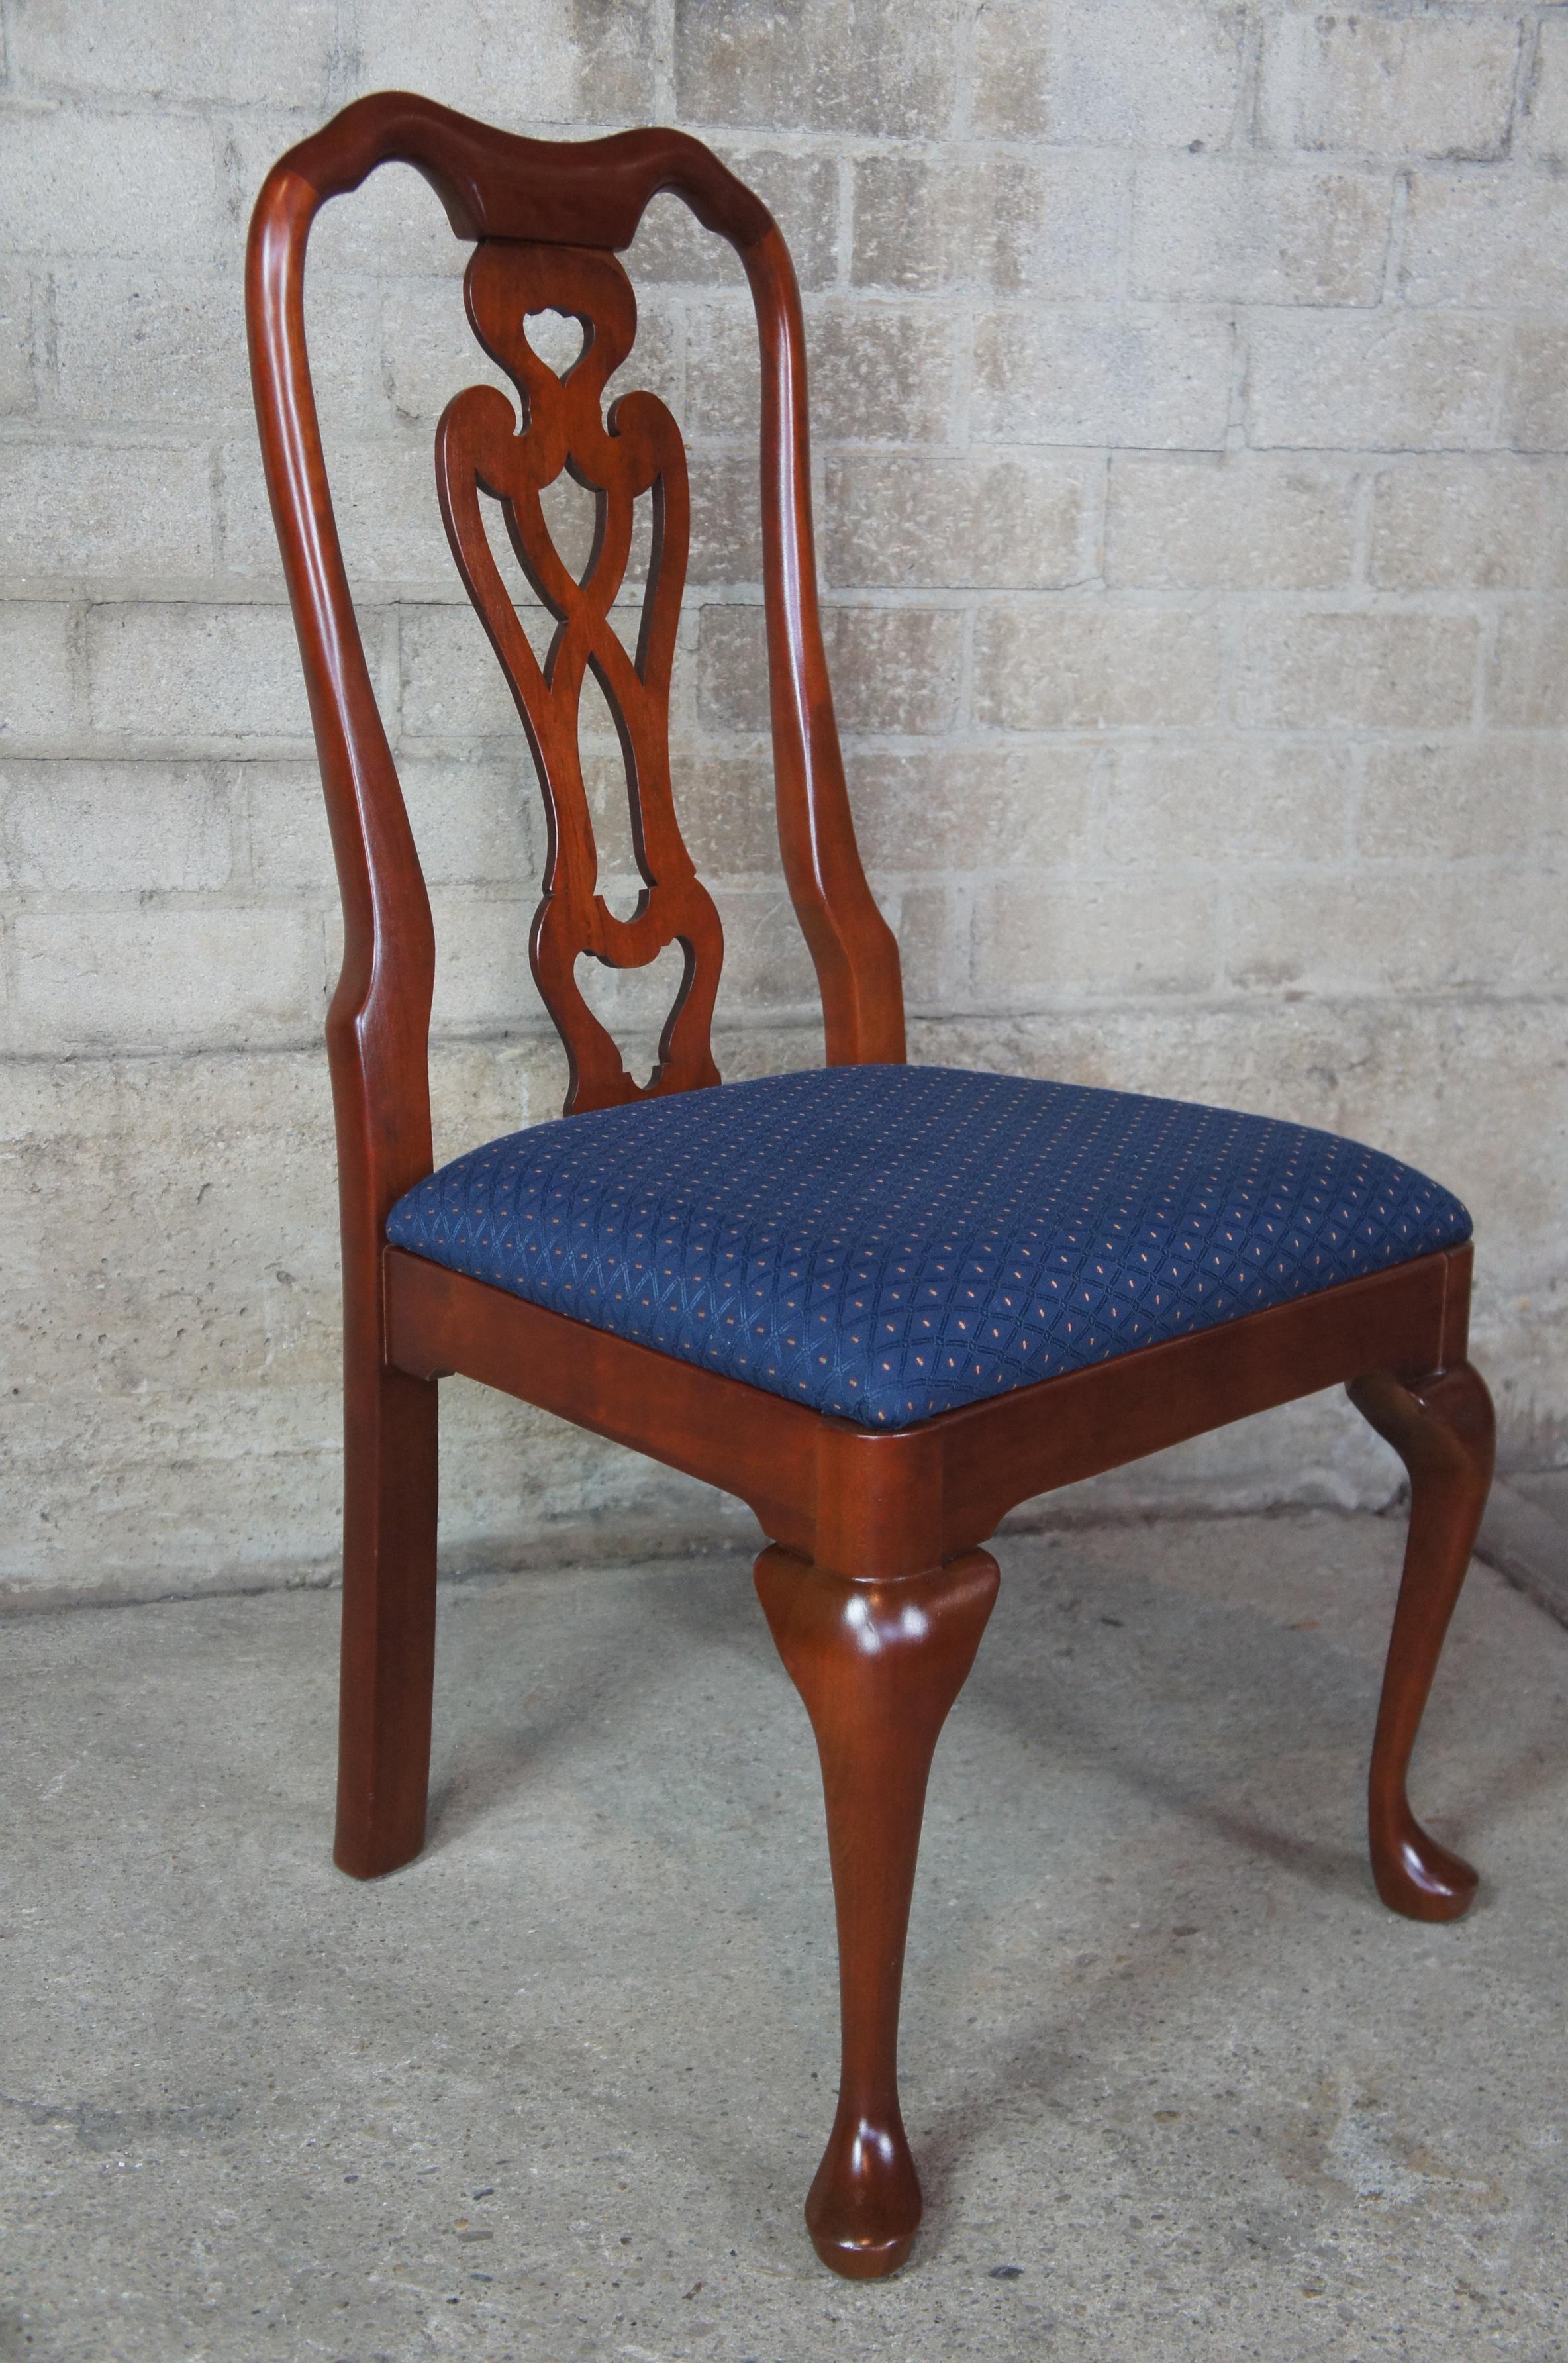 Pennsylvania House Queen Anne Solid Cherry Dining Room Chairs Blue Set of 8 1